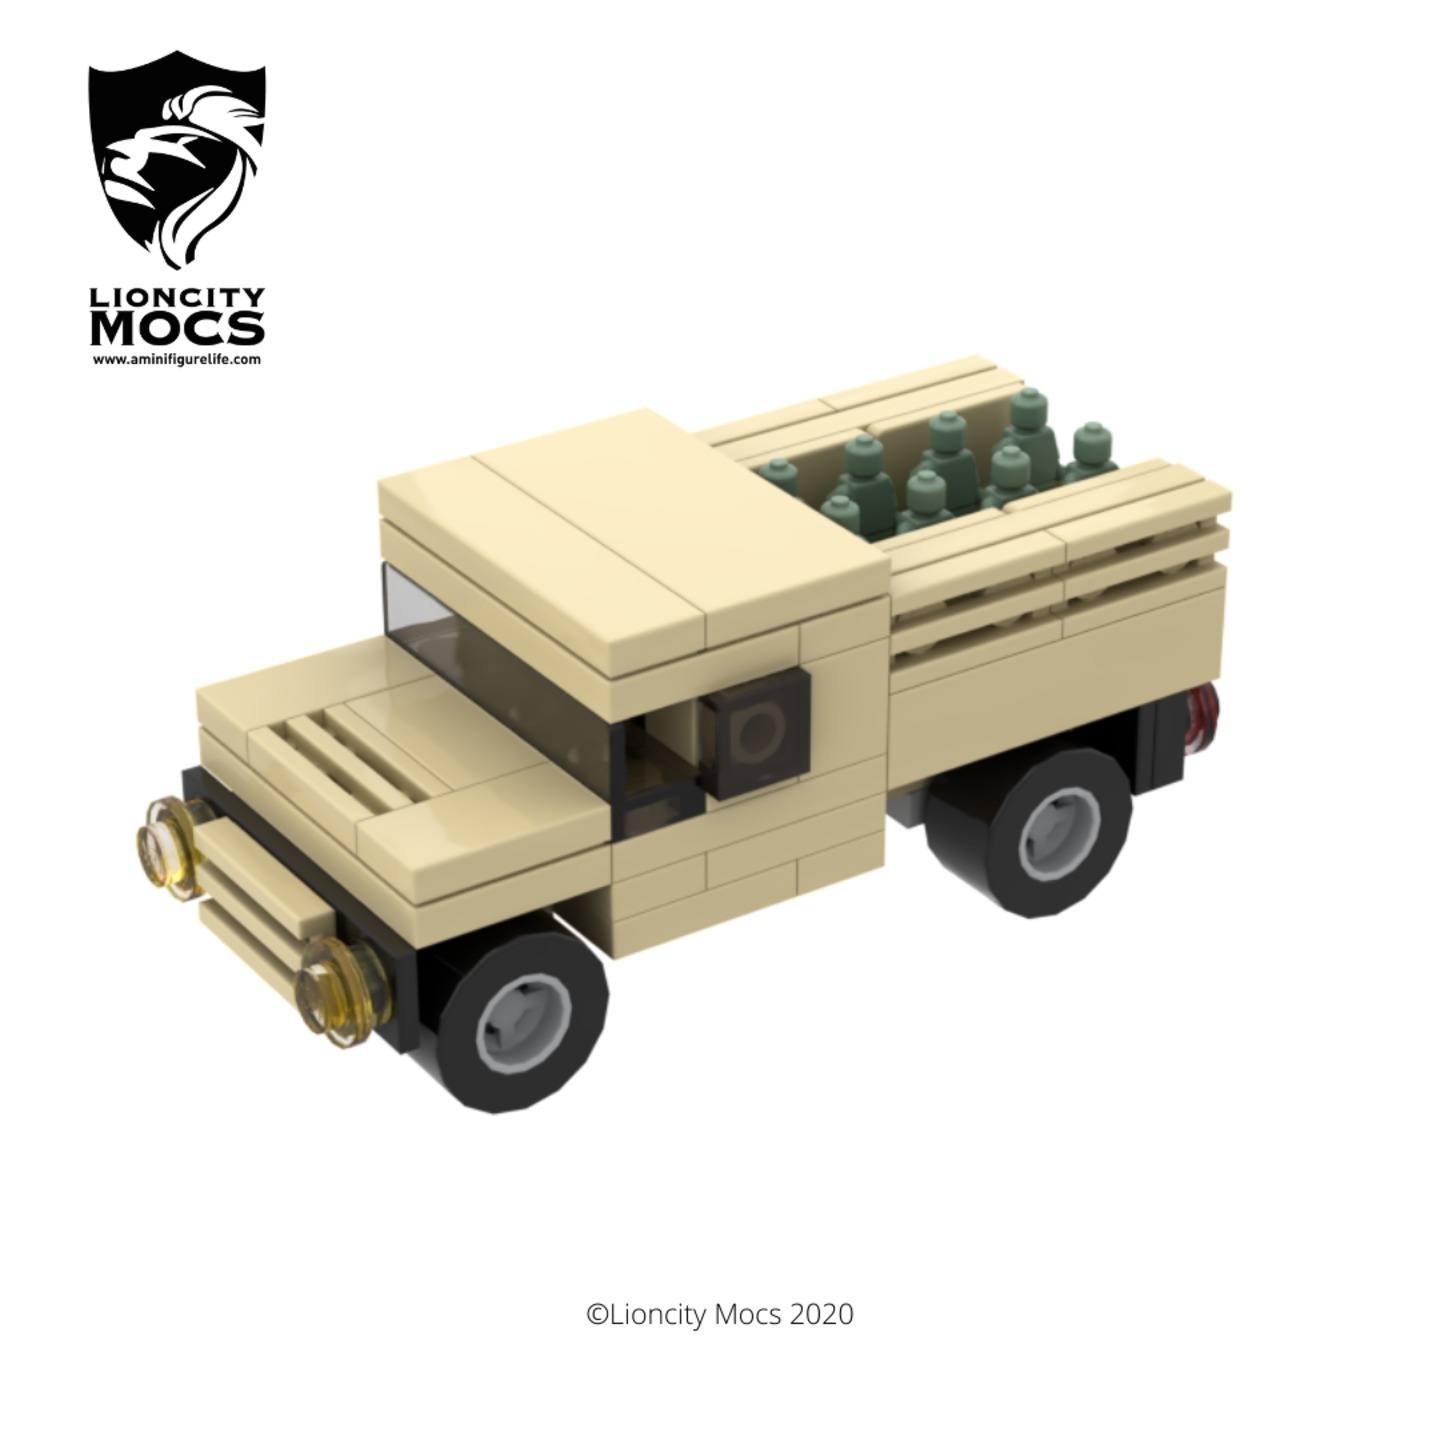  [PDF Instructions Only] Humvee Troop Carrier Mini Vehicle